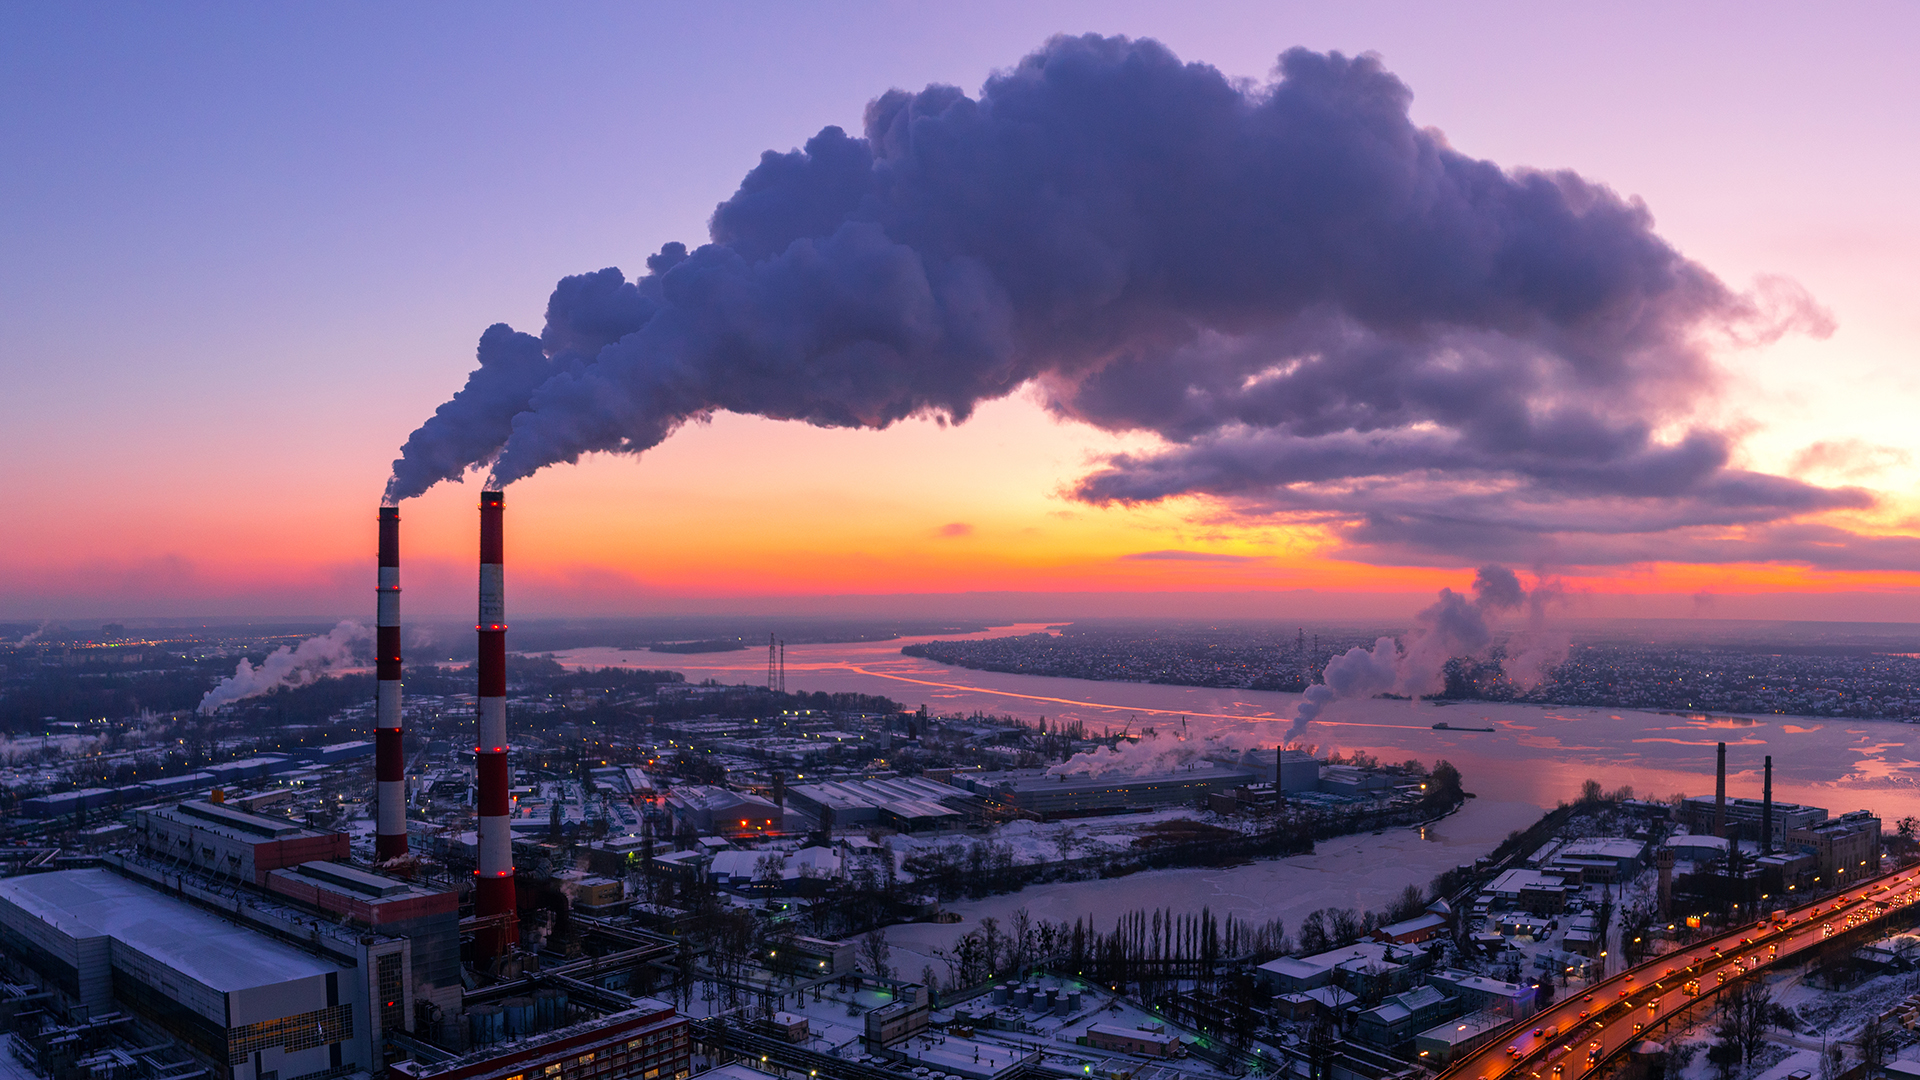 Recent proposed amendments to the UK and EU Emissions Trading Schemes (ETS)